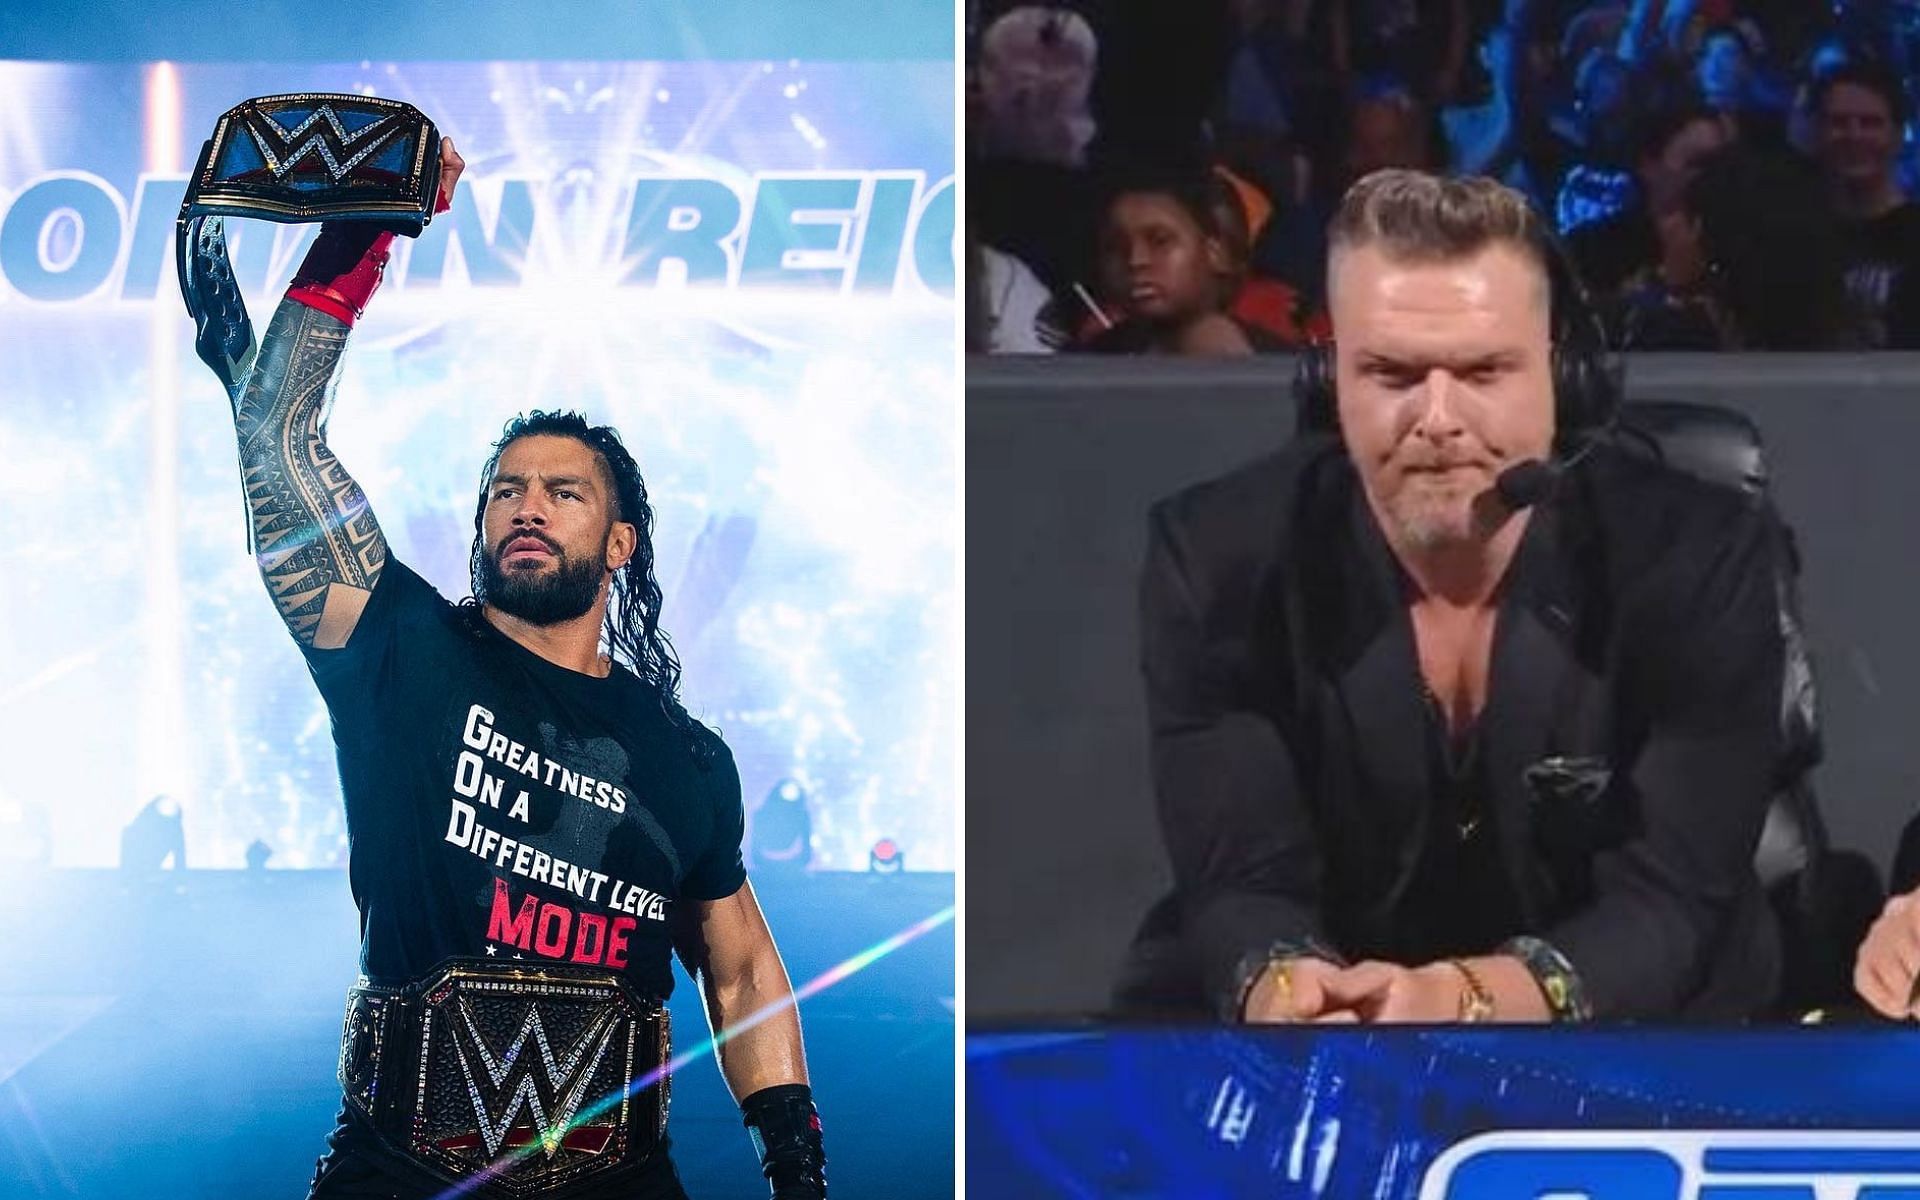 Undisputed WWE Universal Champion Roman Reigns (left); Pat McAfee on commentary (right)